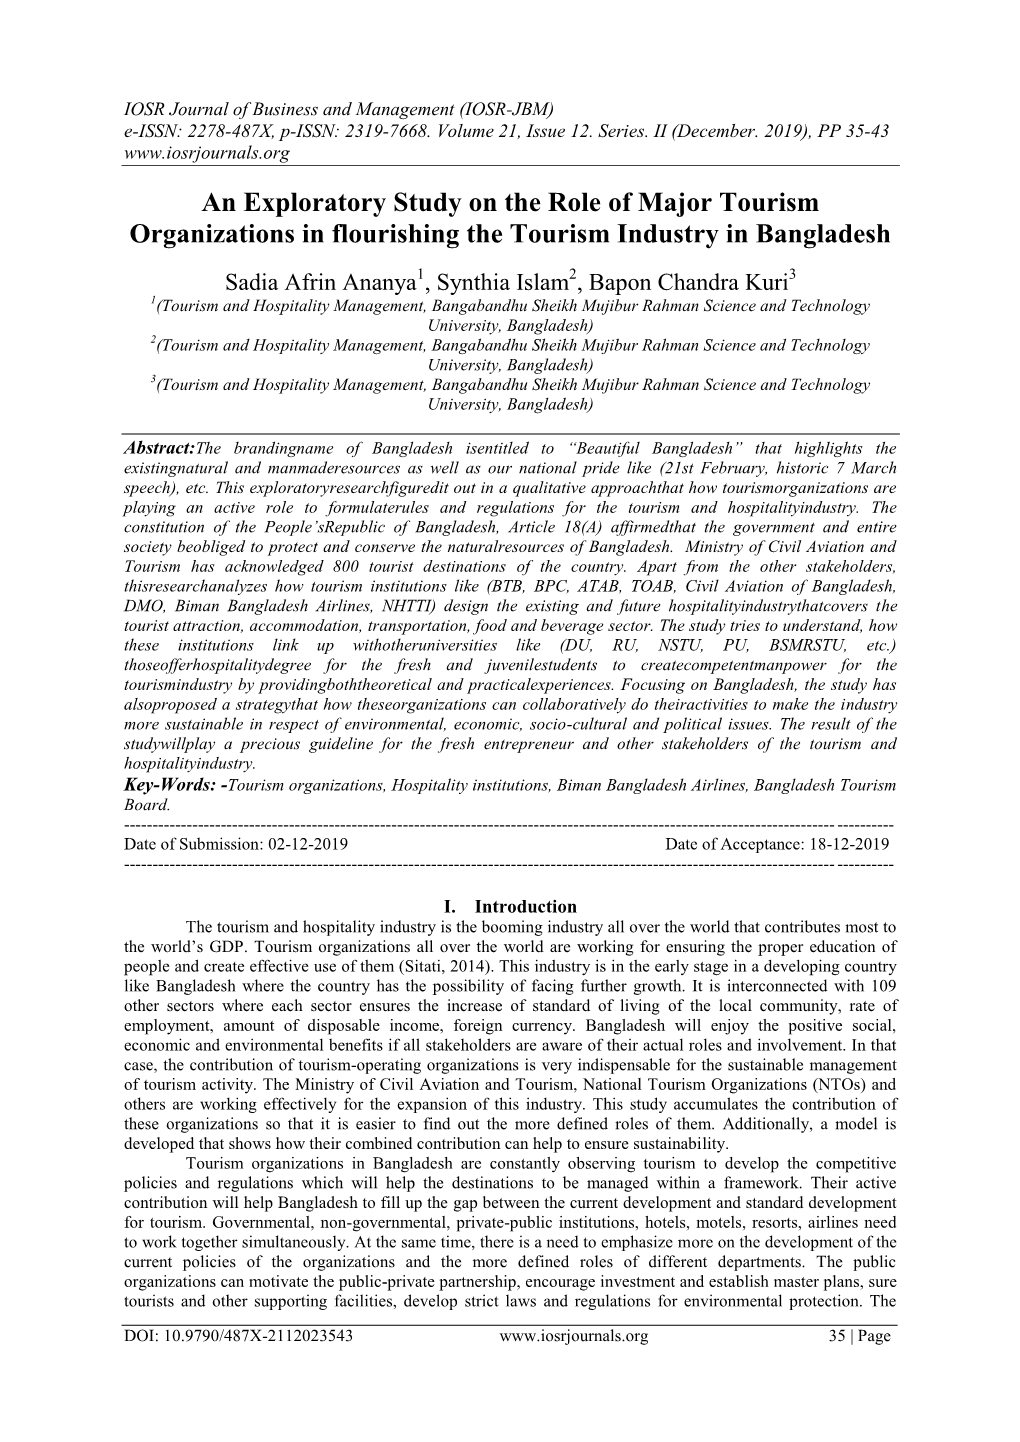 An Exploratory Study on the Role of Major Tourism Organizations in Flourishing the Tourism Industry in Bangladesh